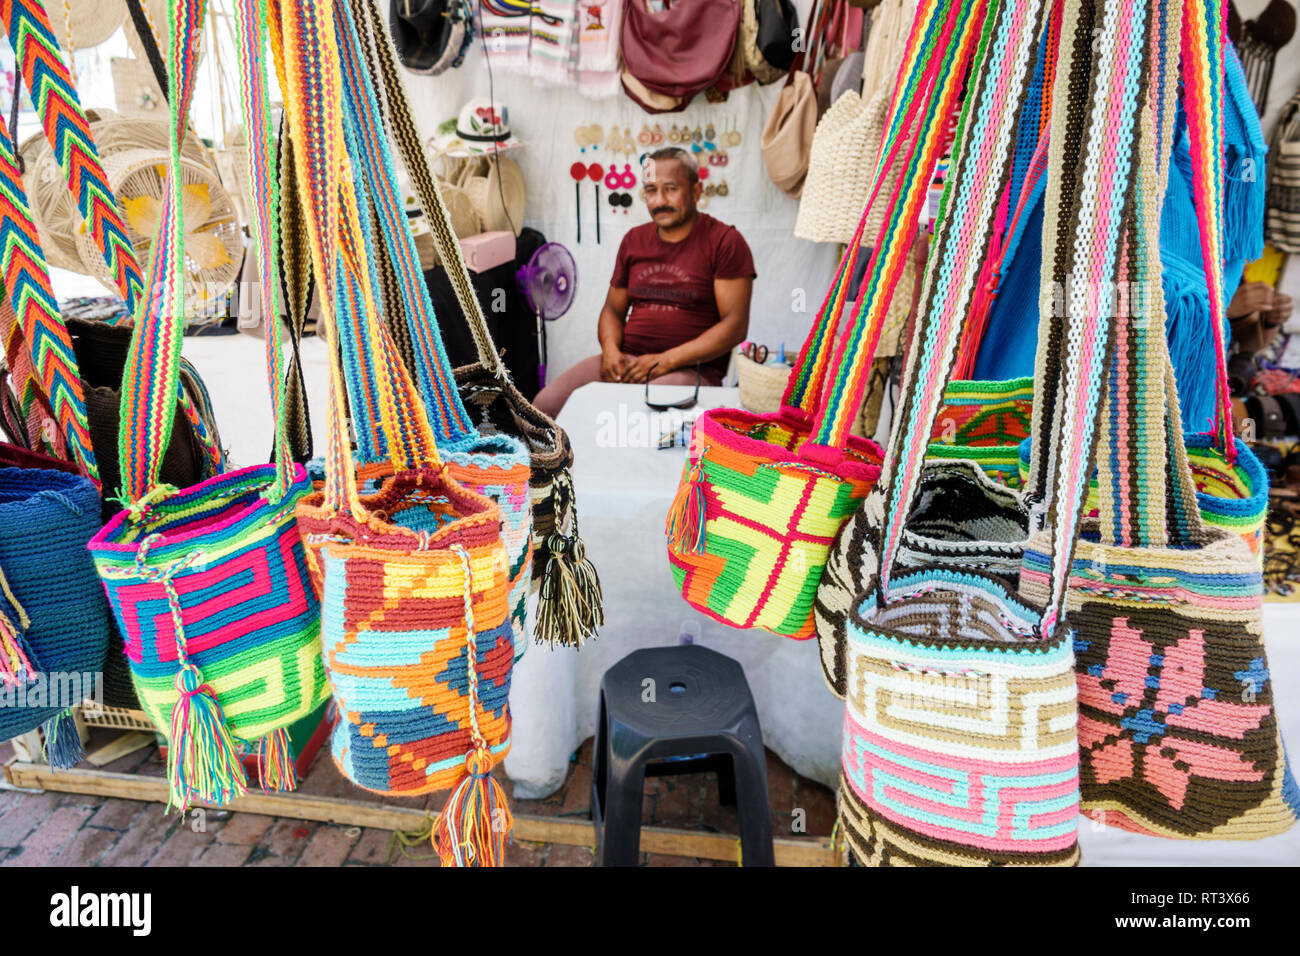 Cartagena Colombia,shopping shoppers shop shops market buying selling,store stores business businesses,display sale,handbags,Hispanic man men male,ven Stock Photo